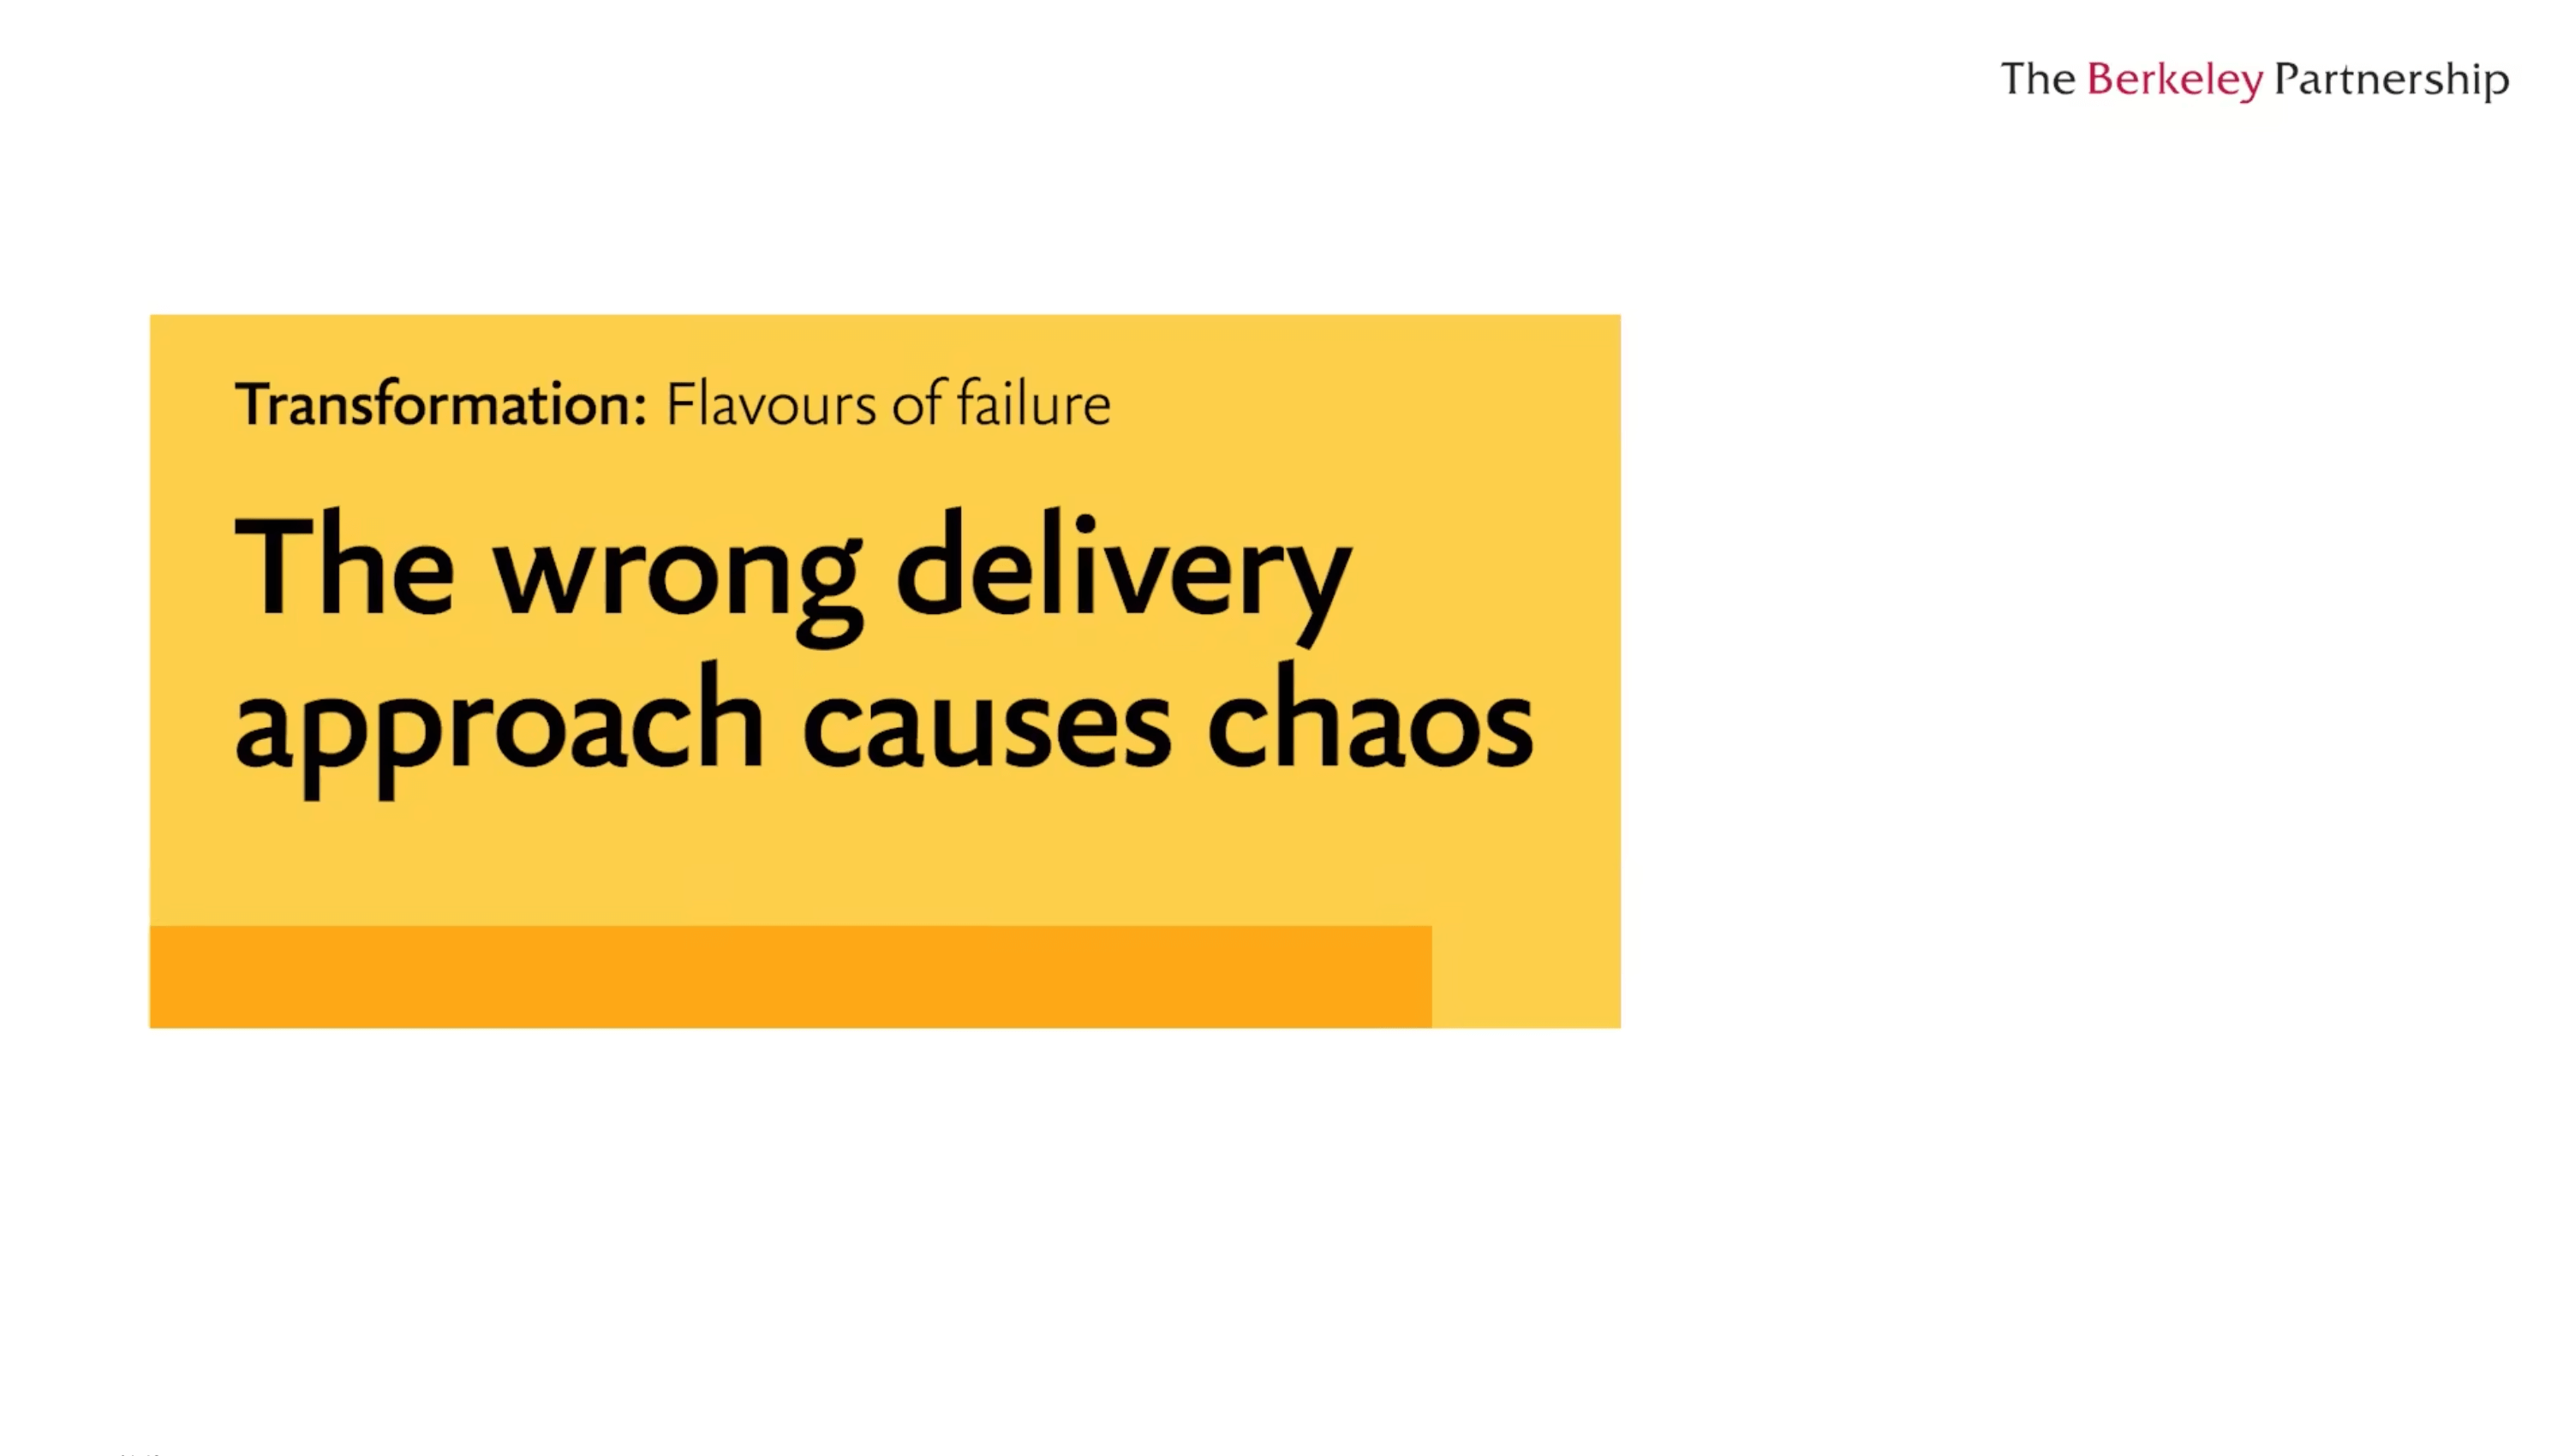 Flavours of failure: The wrong delivery approach causes chaos